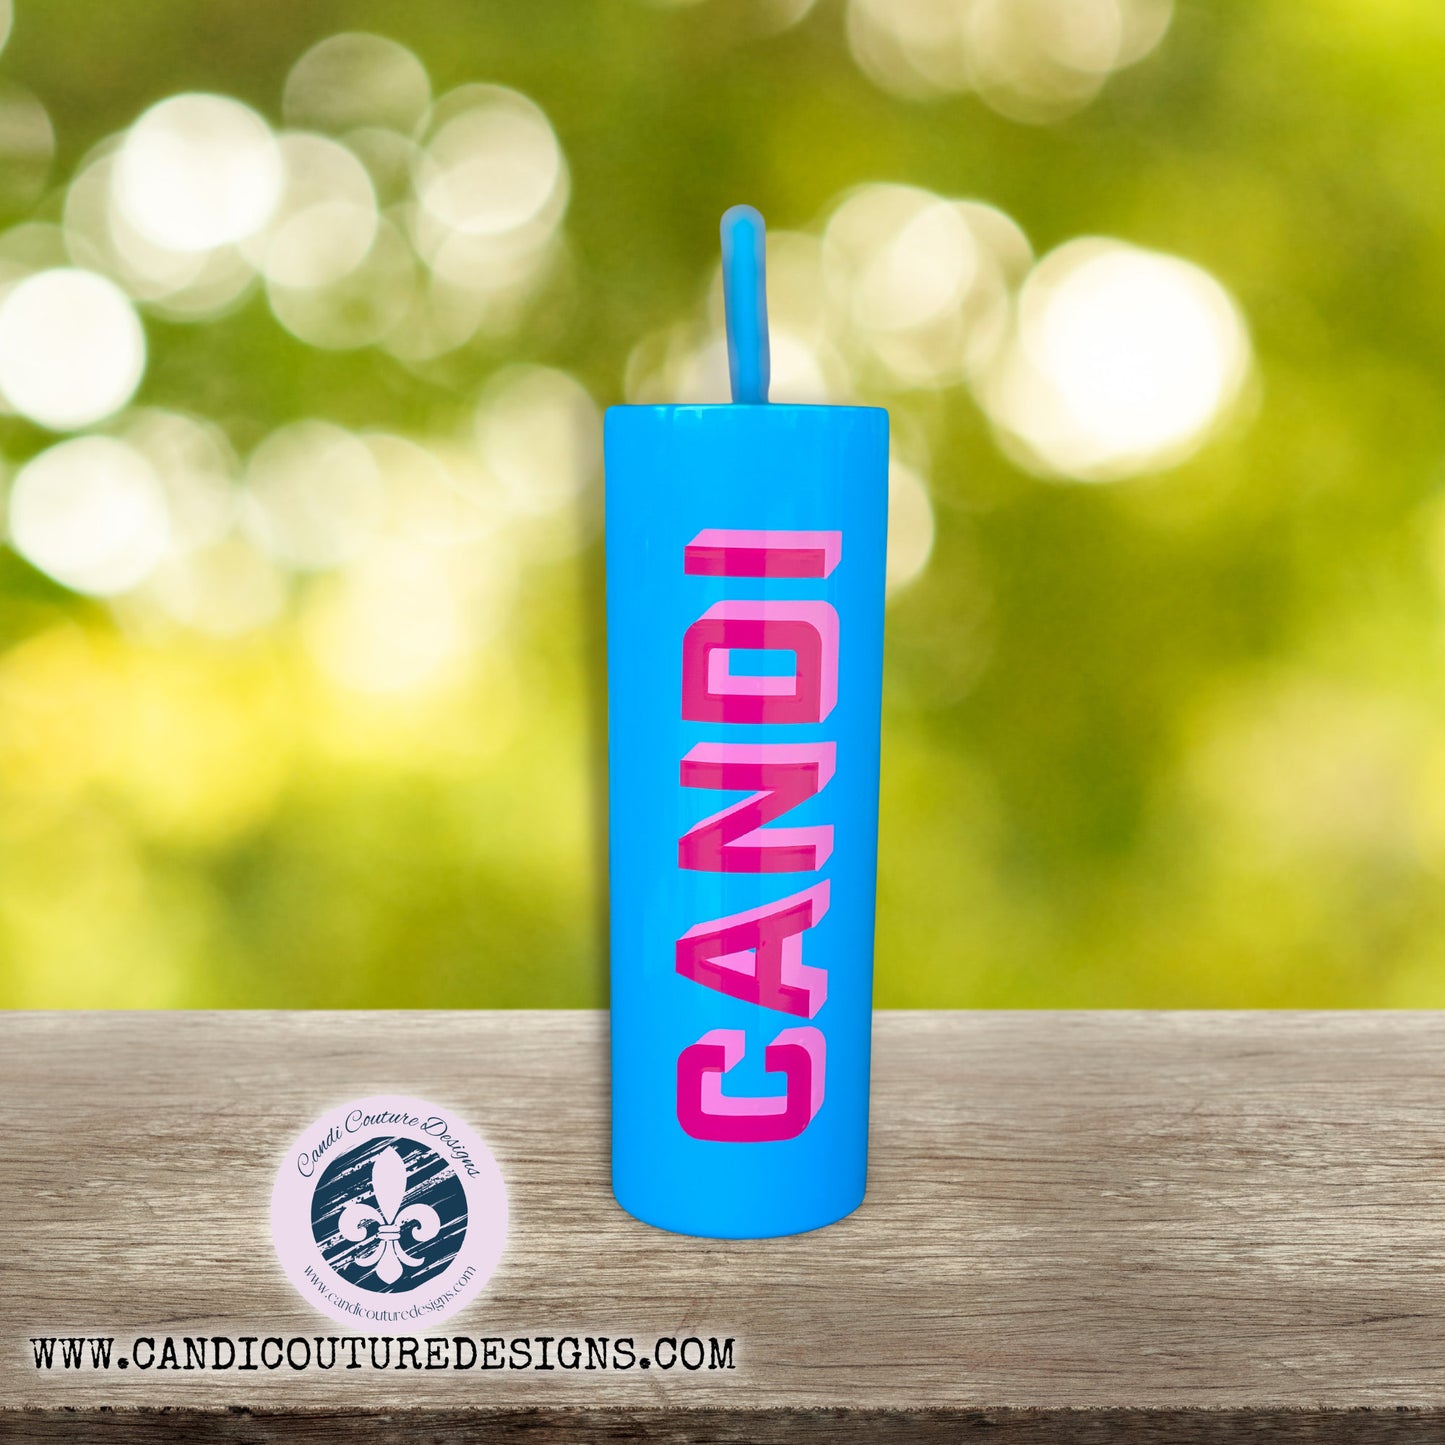 Personalized Skinny Tumbler with Lid and Straw, Custom Insulated Tumbler with Name,